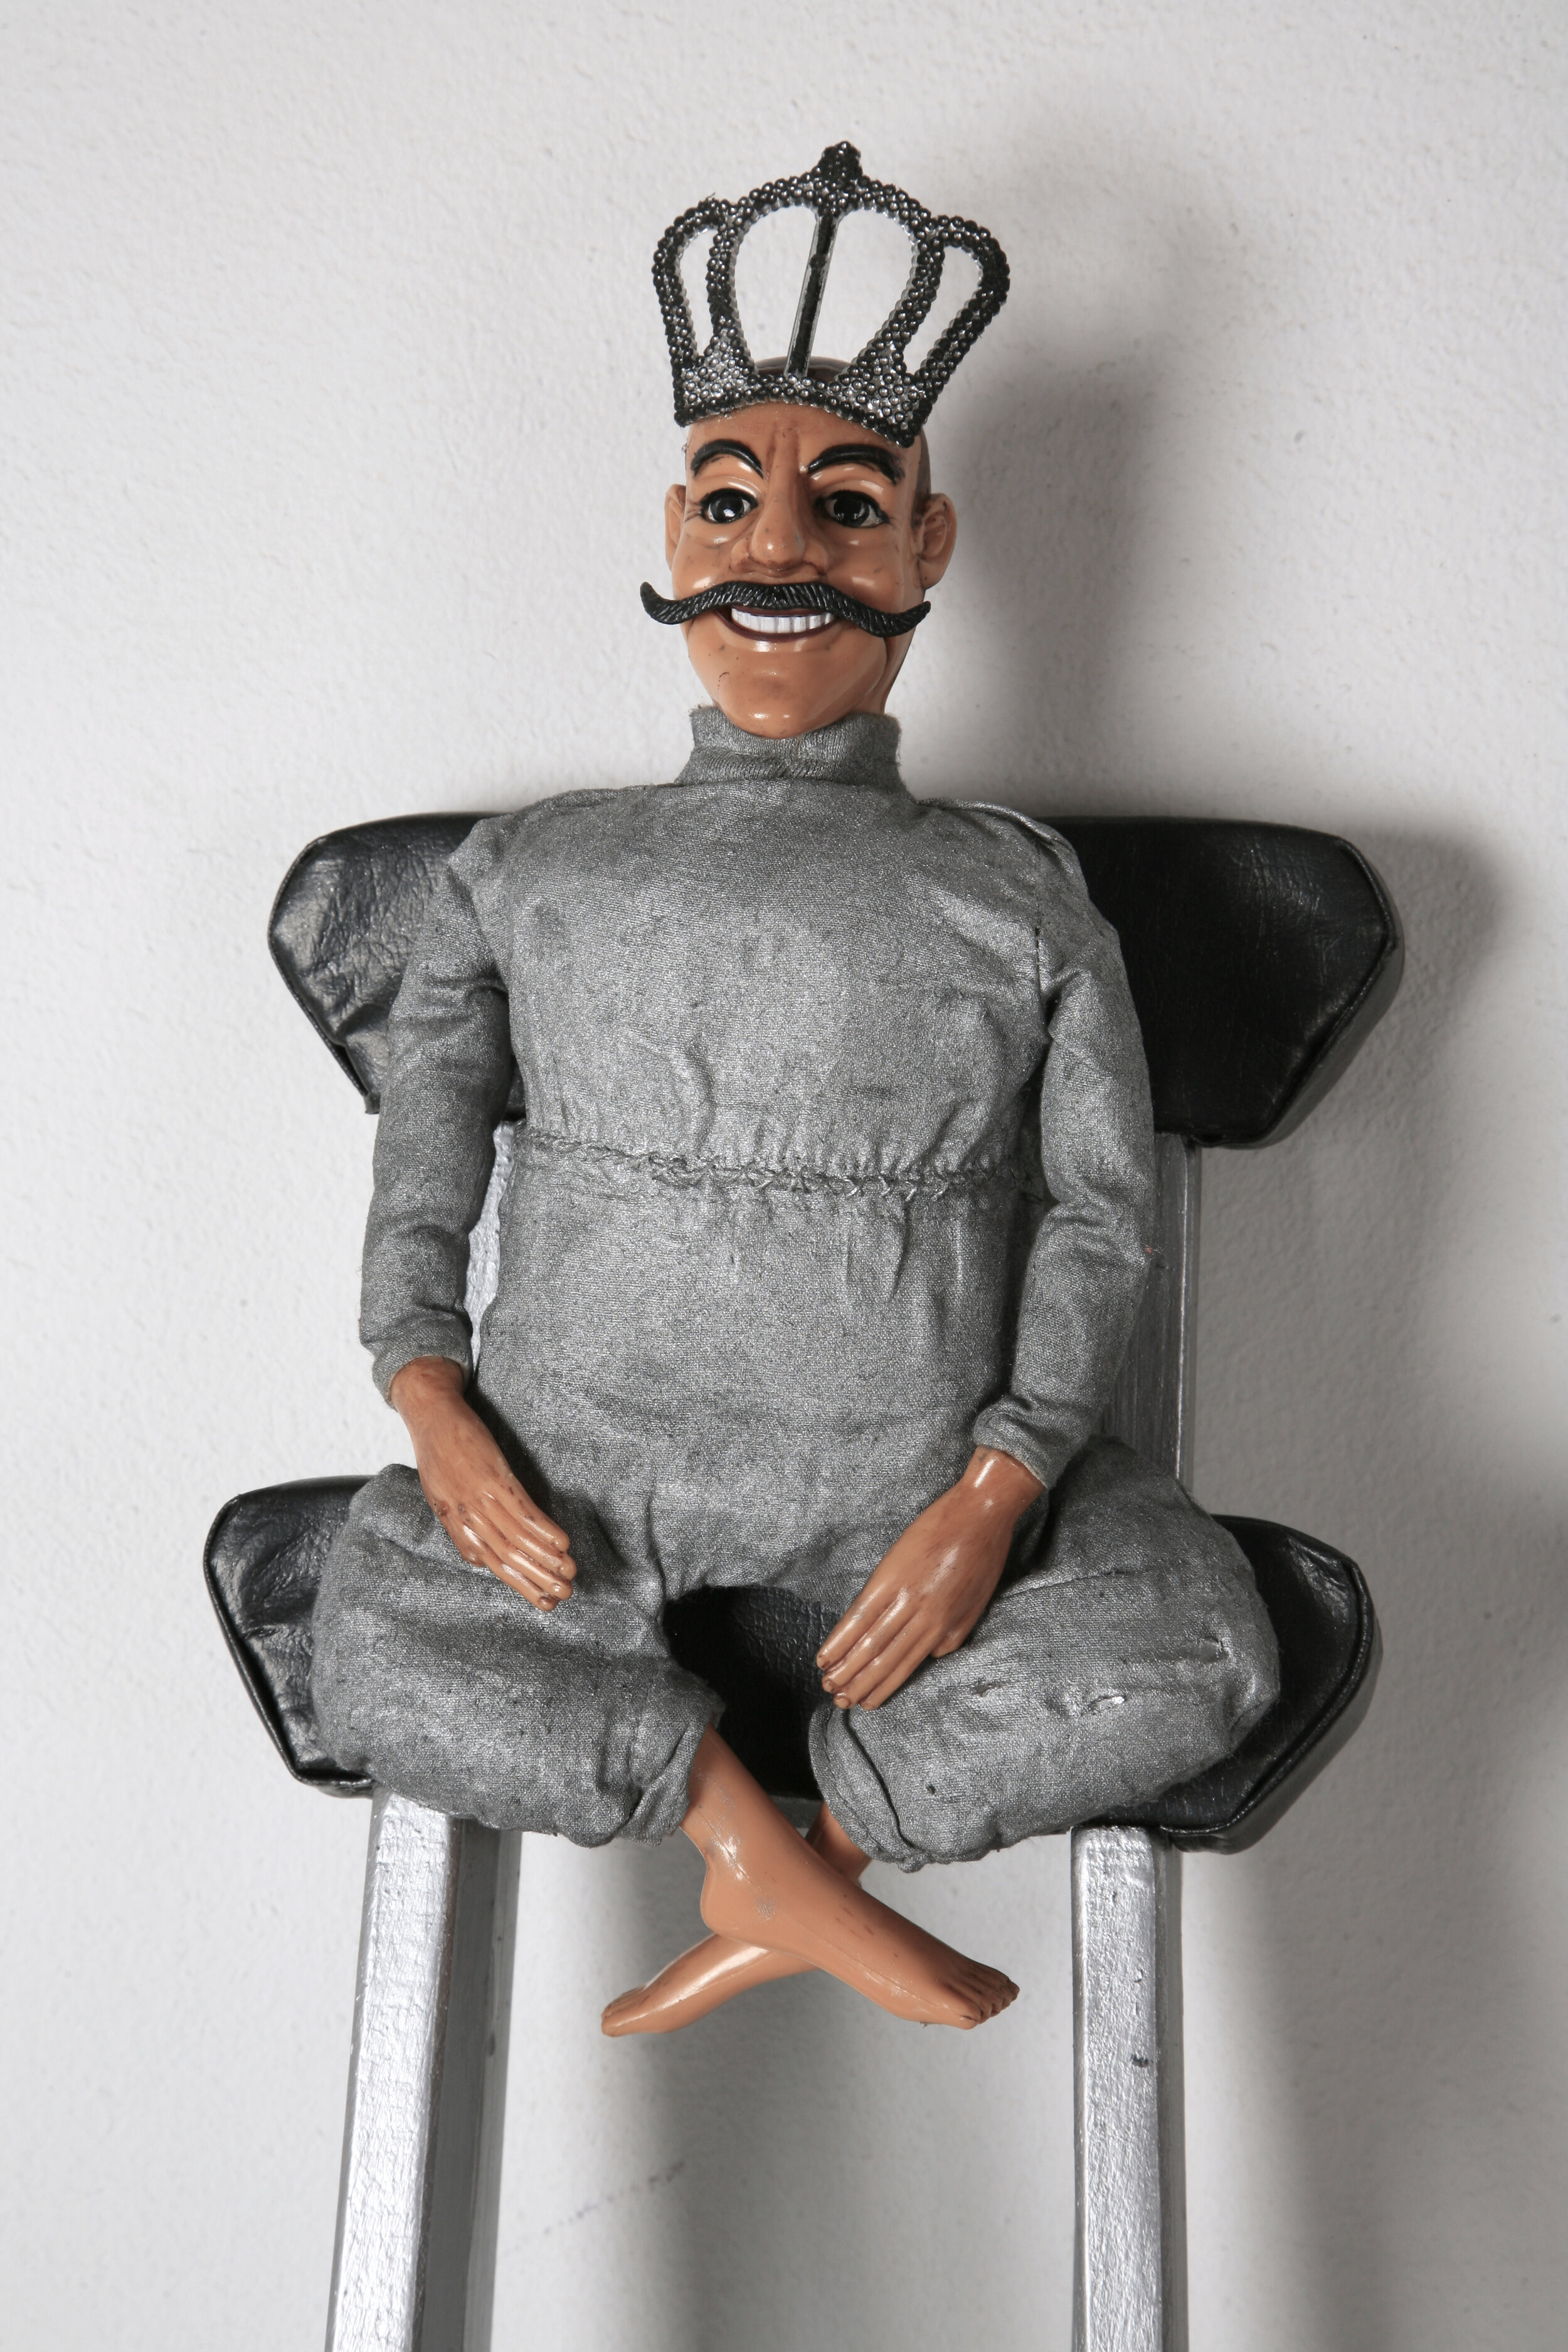  Elusive Kingship (detail), 2010, recycled plastic doll, wooden crutches, acrylic paint, 105 x 16 x 5 cm 